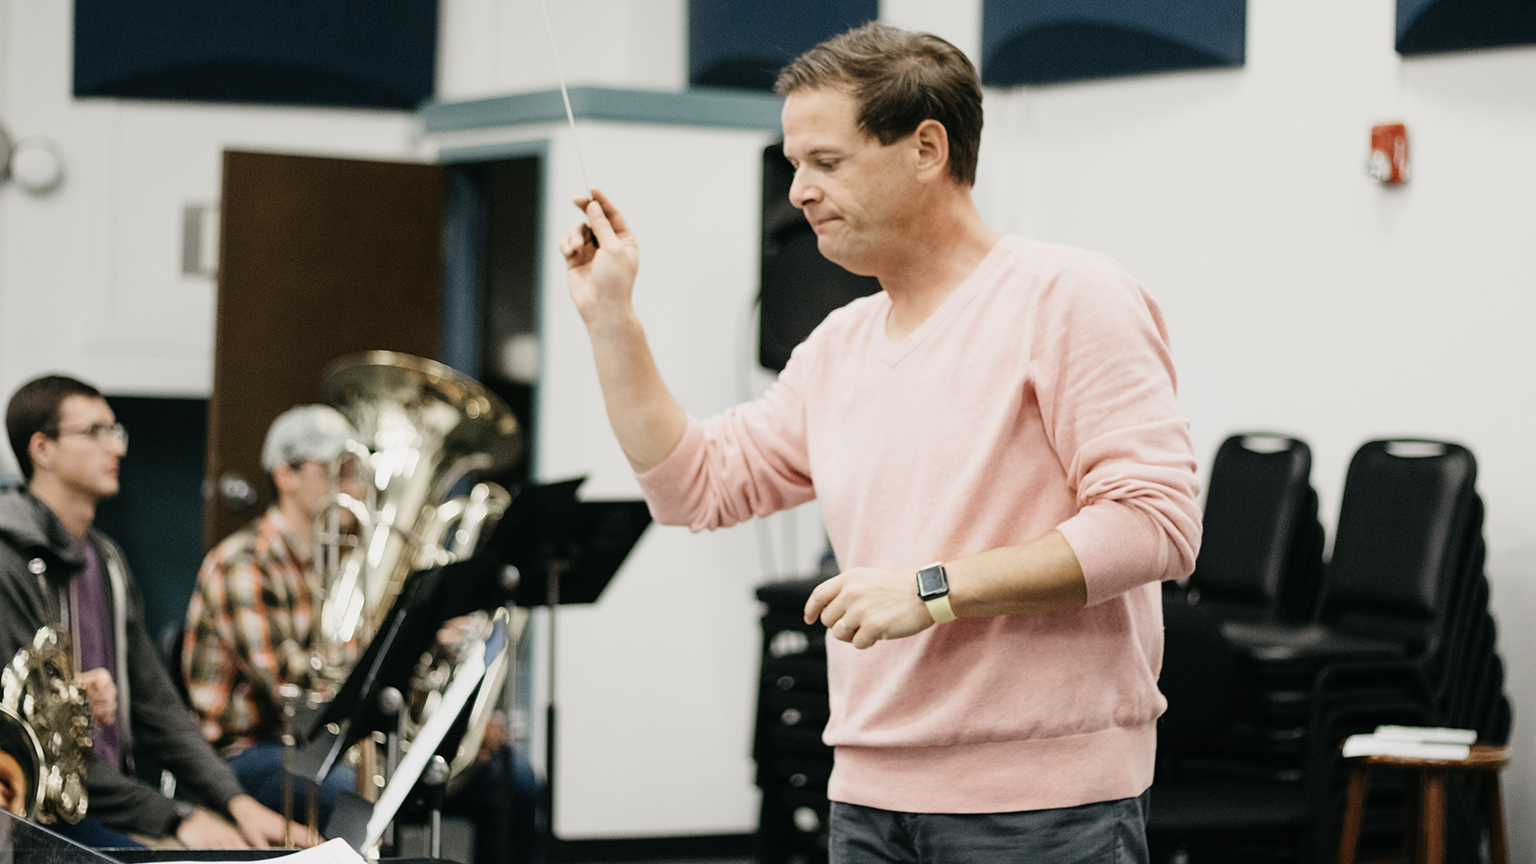 Benjamin Diden directing a band during a rehearsal session.